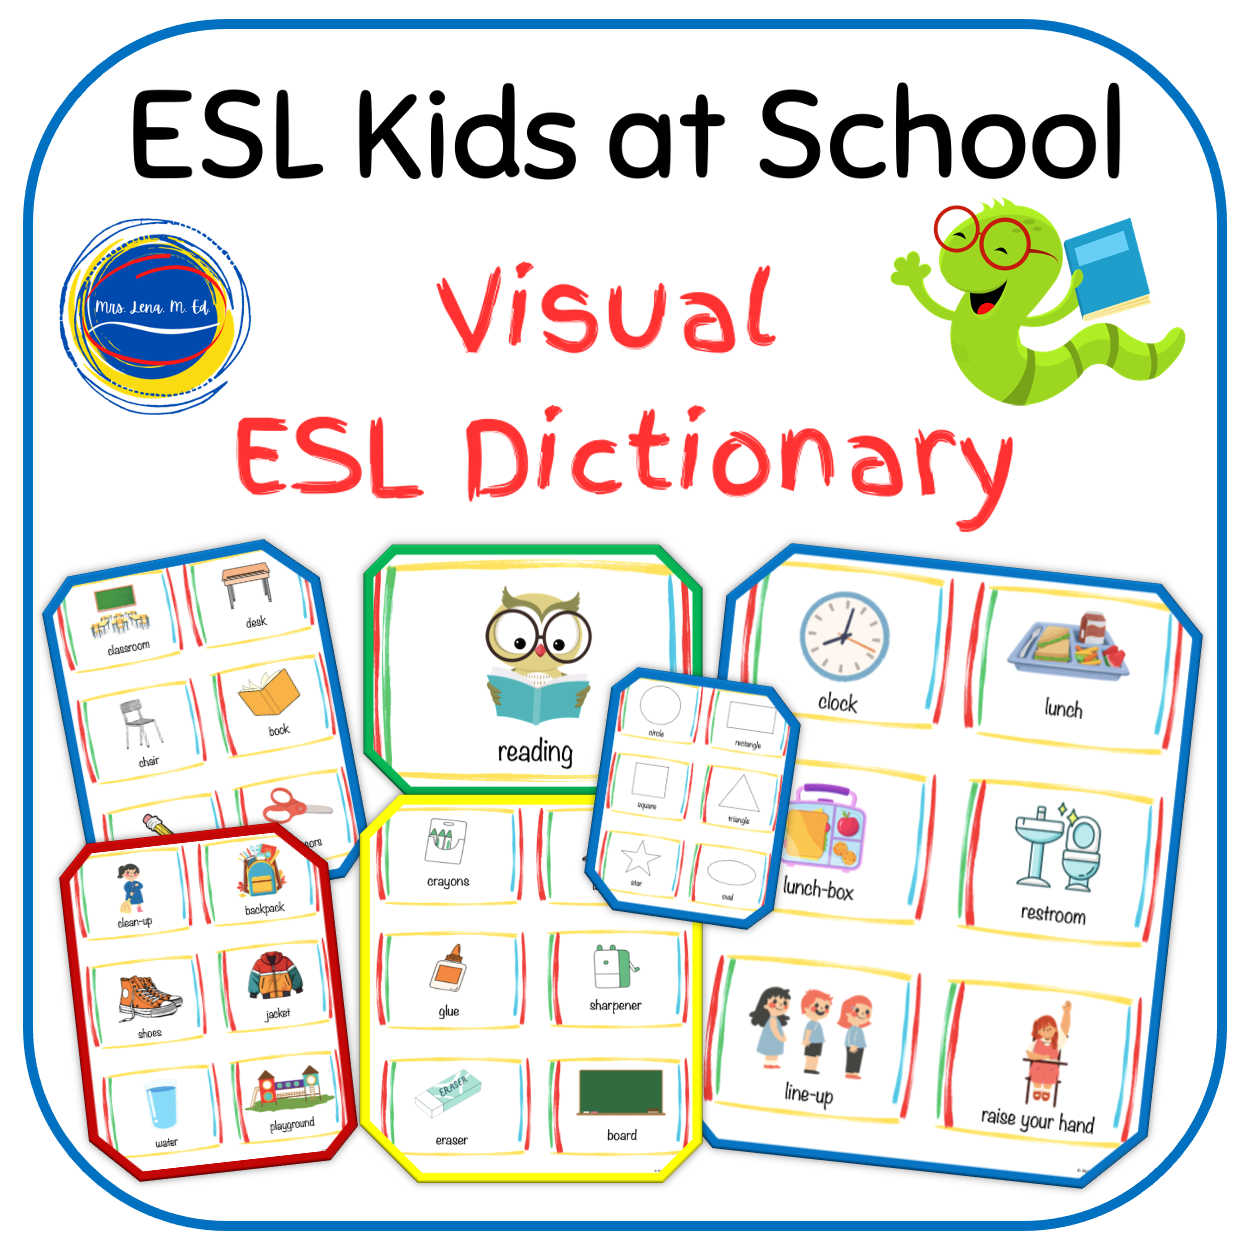 ESL Students At School Visual And Voice Dictionary Boom Cards™ Game & Printable